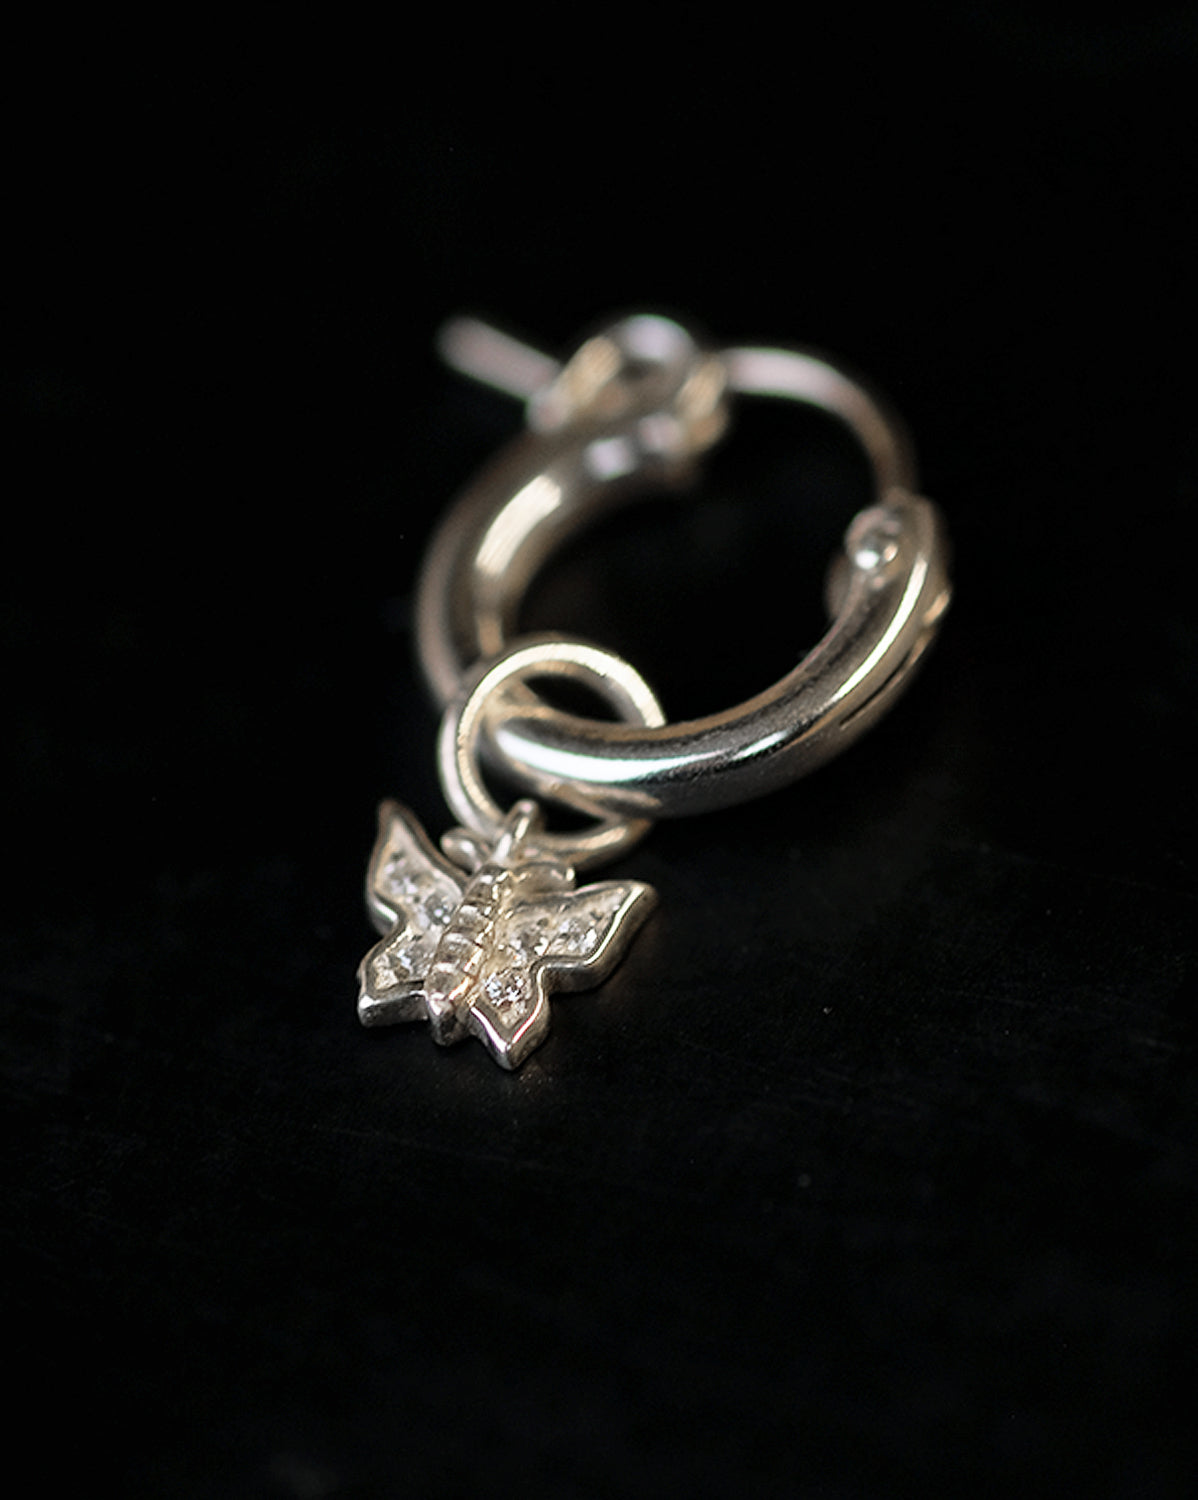 Athalia Butterfly Charm - Sterling Silver